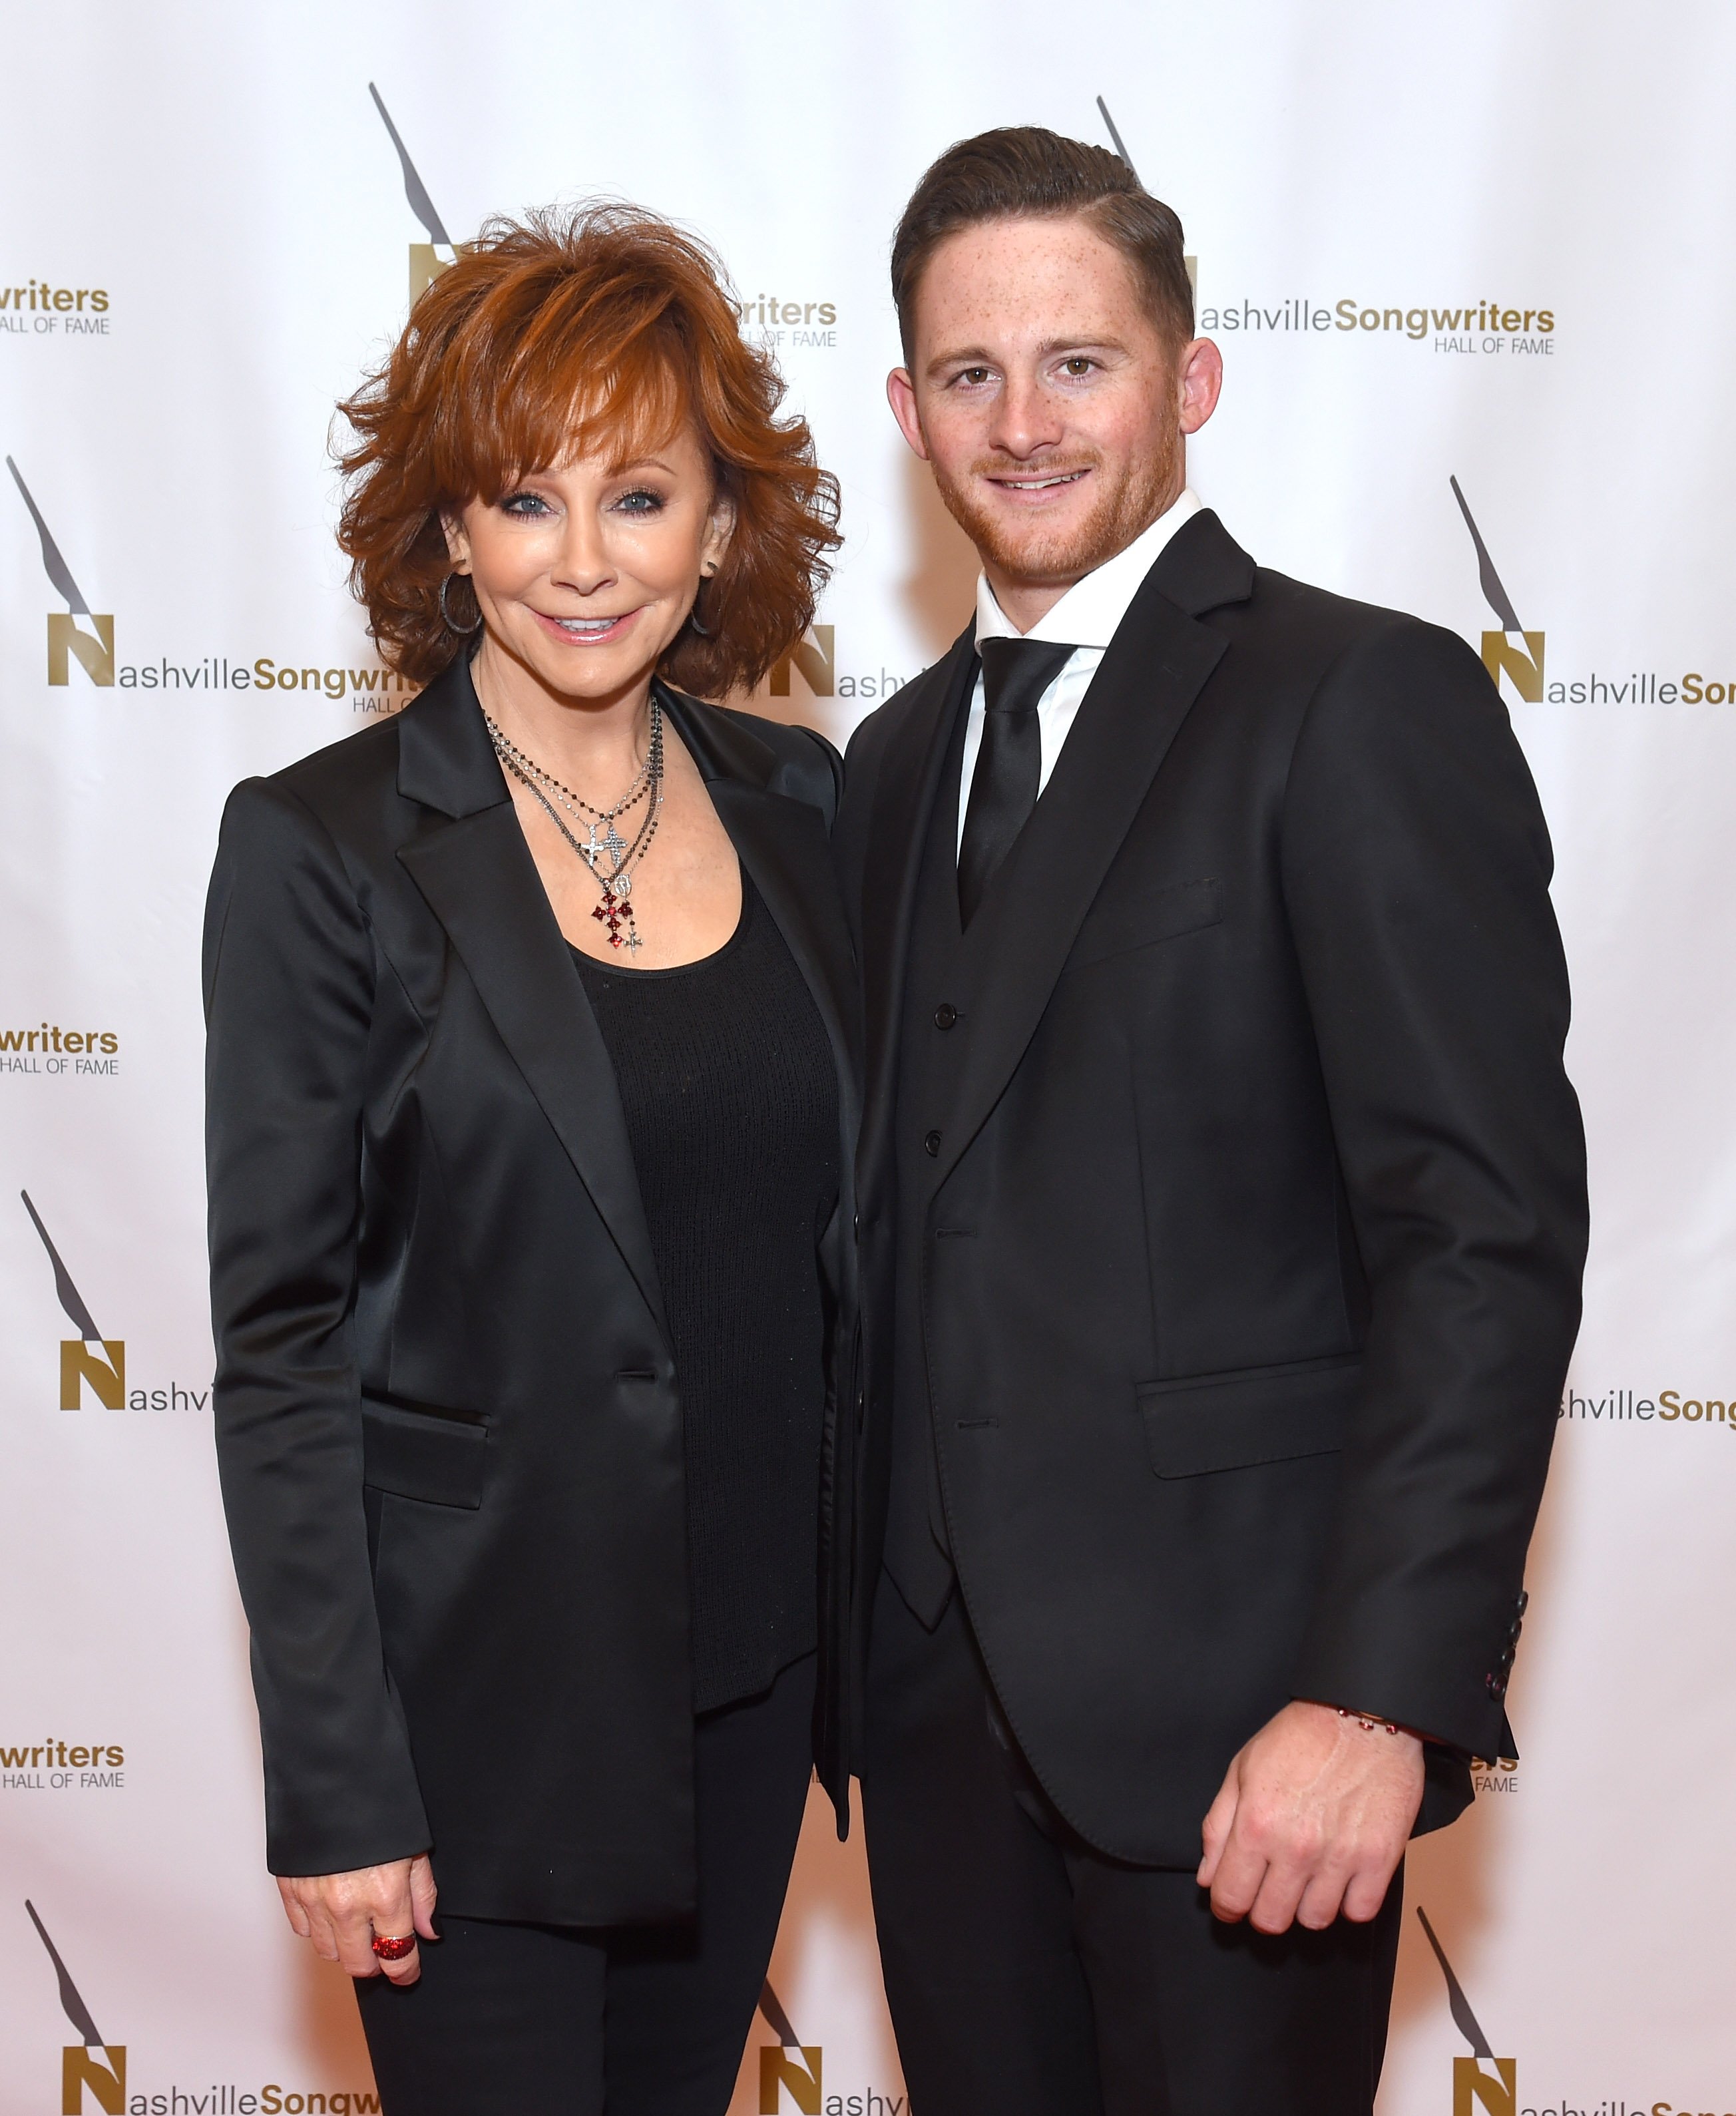 Reba McEntire's Son Shares Thankful Post Showing His BDay Celebration